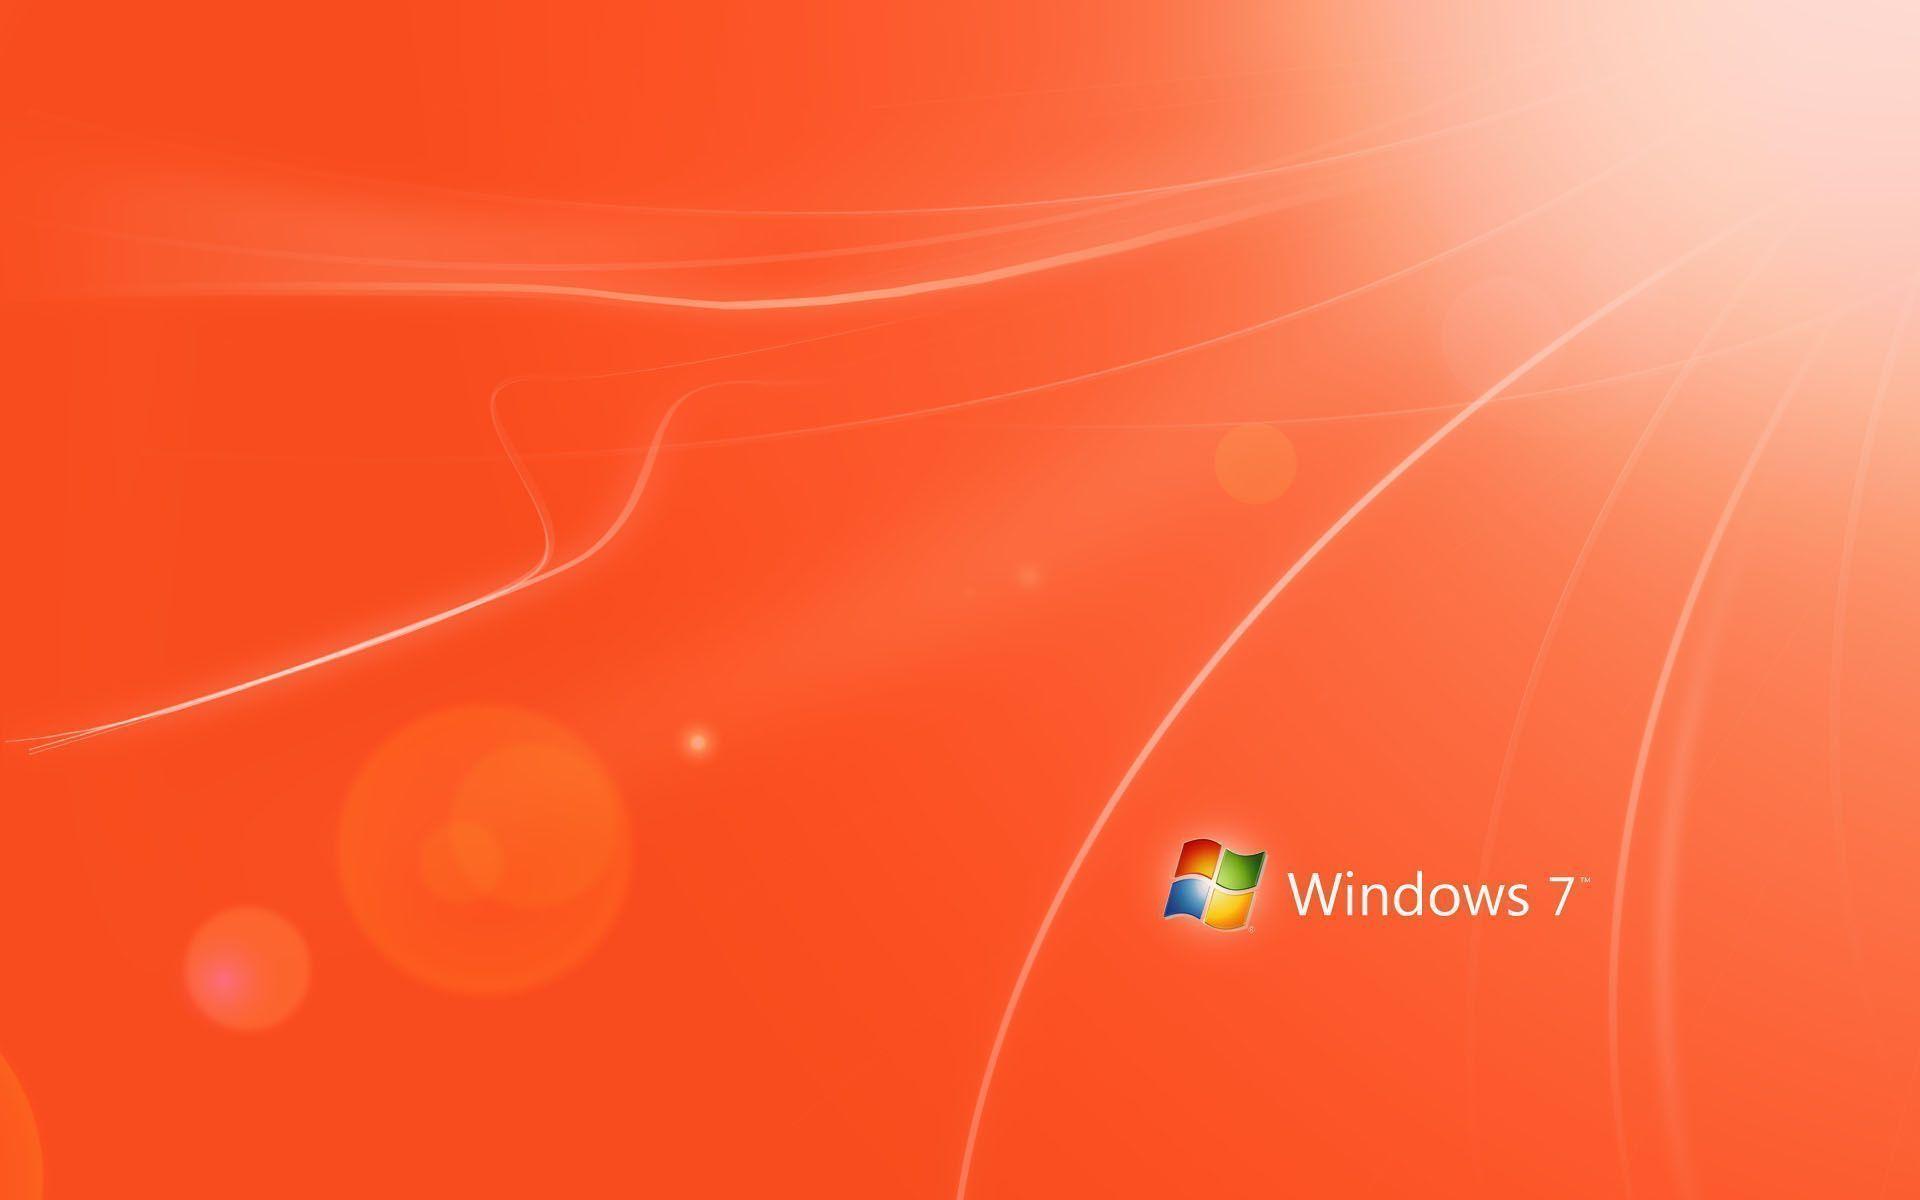 Windows 7 Hd Wallpapers 1080P wallpapers